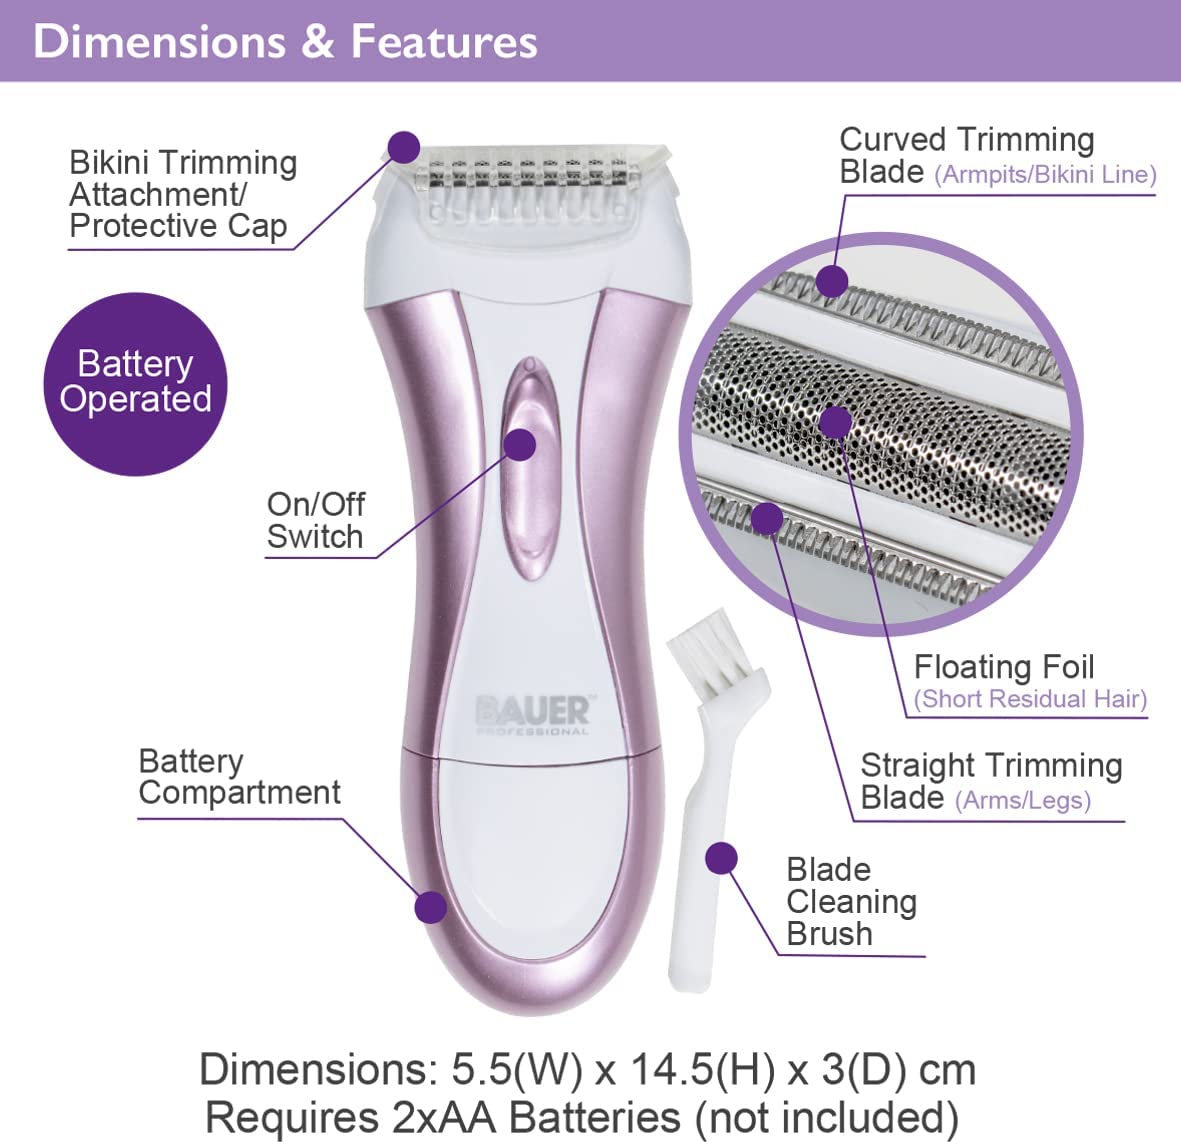 Bauer Professional 38730 Soft & Smooth Lady Shaver (Carton of 12)